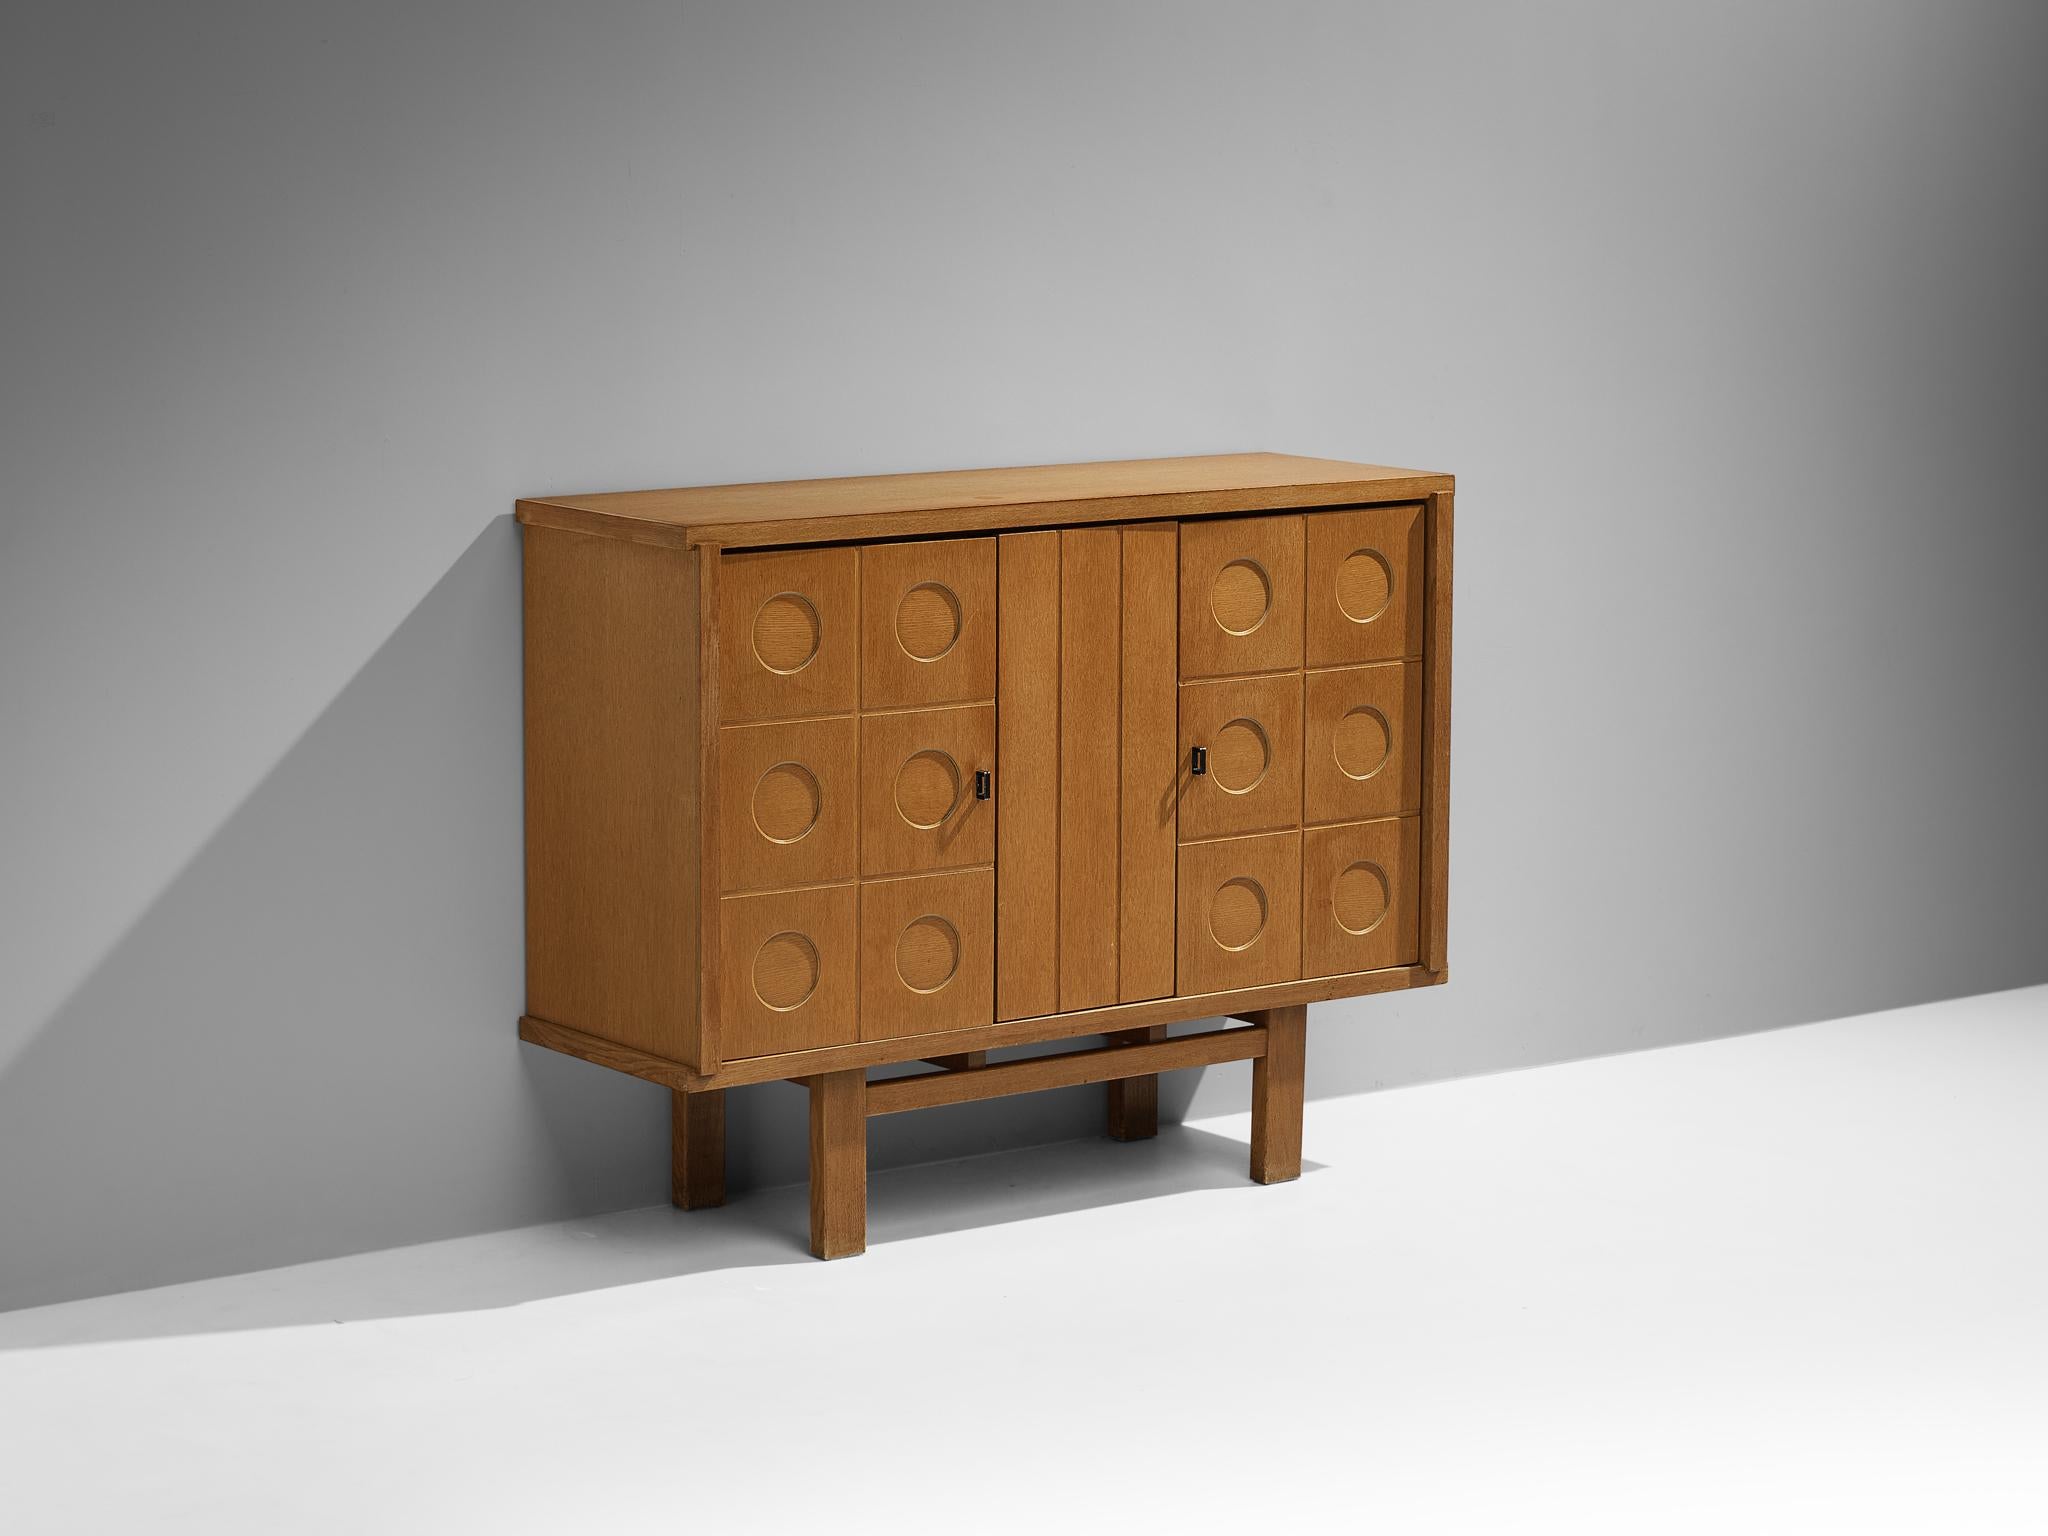 Cabinet or sideboard, oak, coated steel, Belgium, 1970s.

This cabinet features a clear rhythm and flow established by means of a well-thought-out lay out that is utterly well-balanced. The carved circles immediately catch the eye and are the